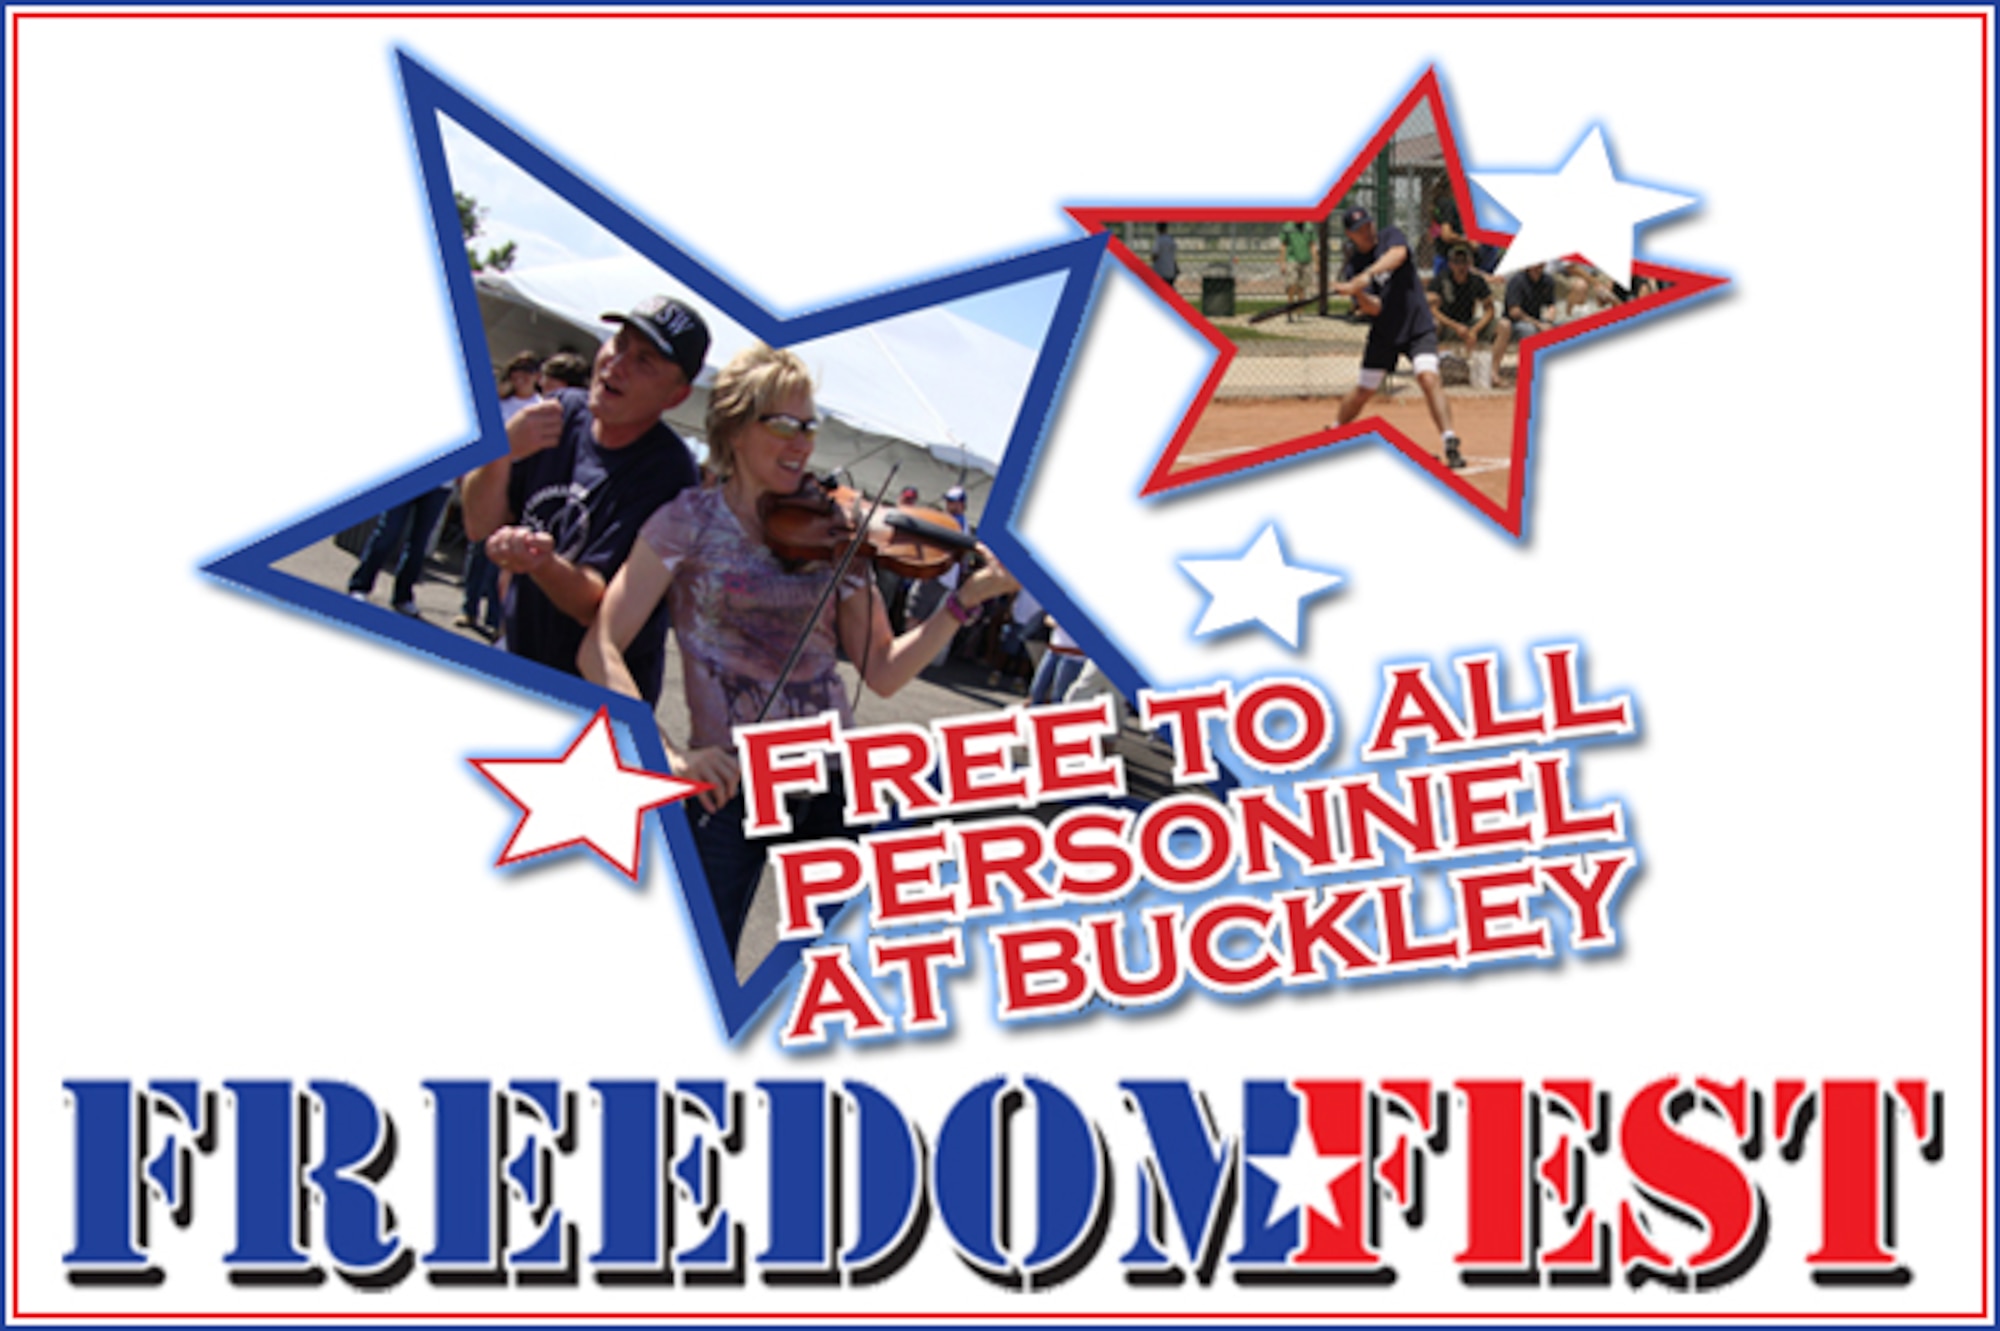 Buckley's Freedom Fest is set for July 1, 11 a.m. - 3 p.m. (U.S. Air Force graphic)